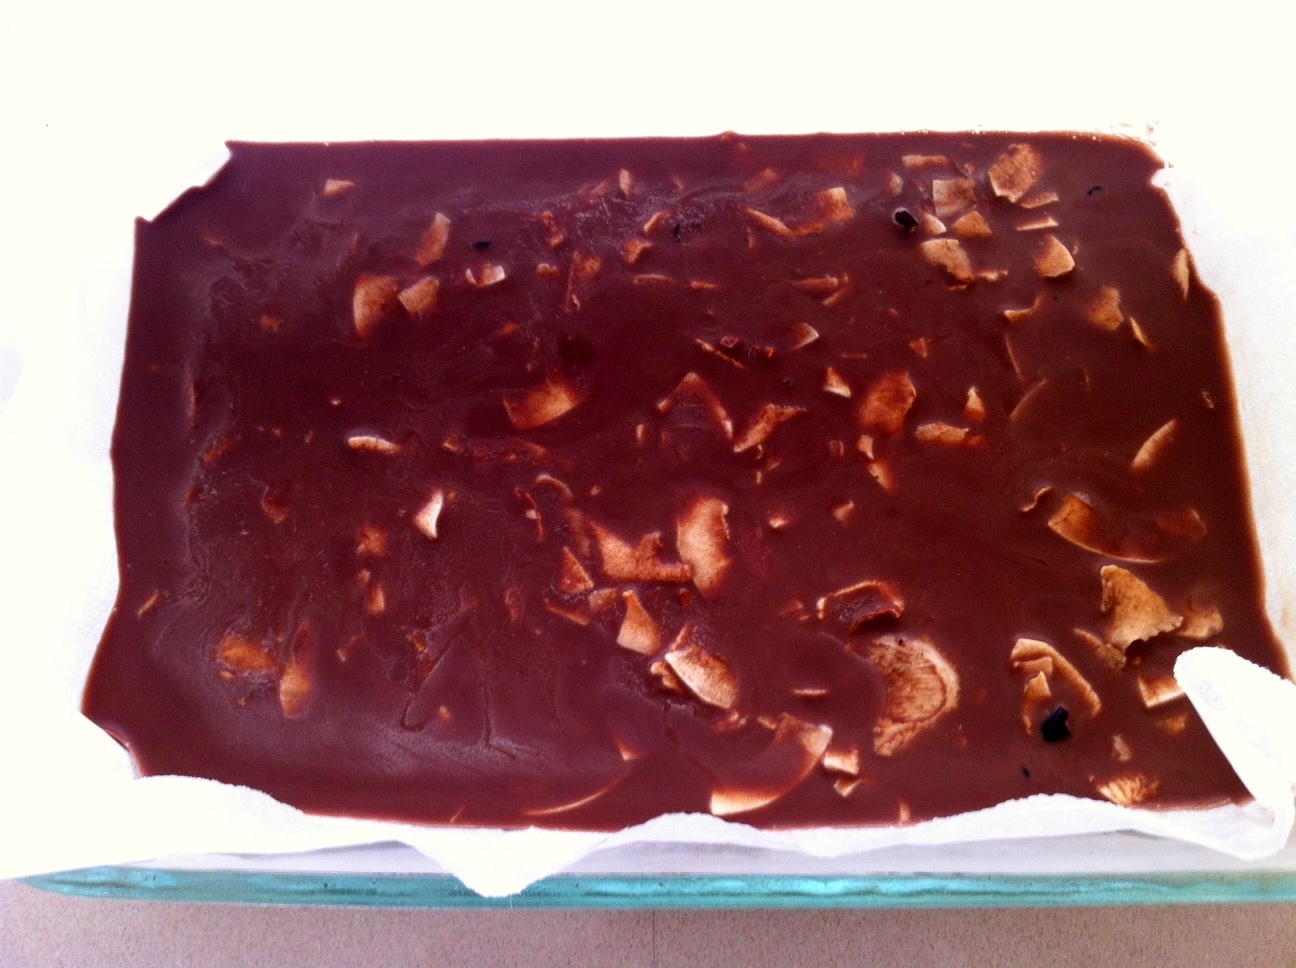 Chocolate poured into tray for cooling